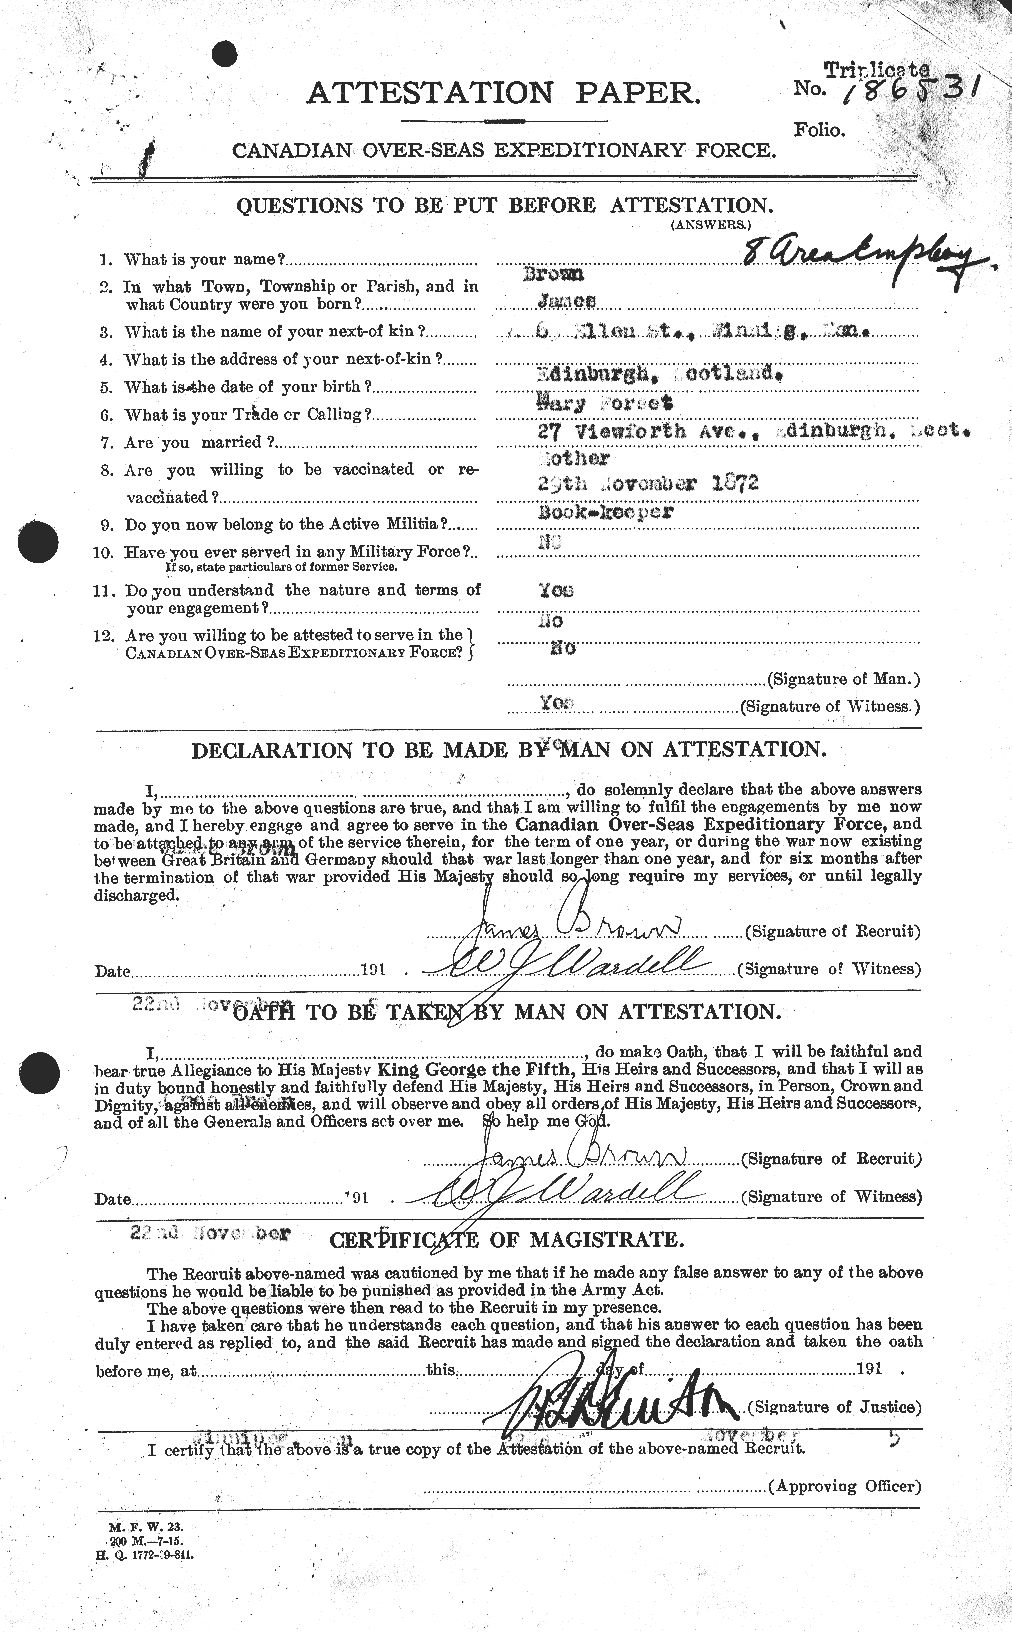 Personnel Records of the First World War - CEF 265724a